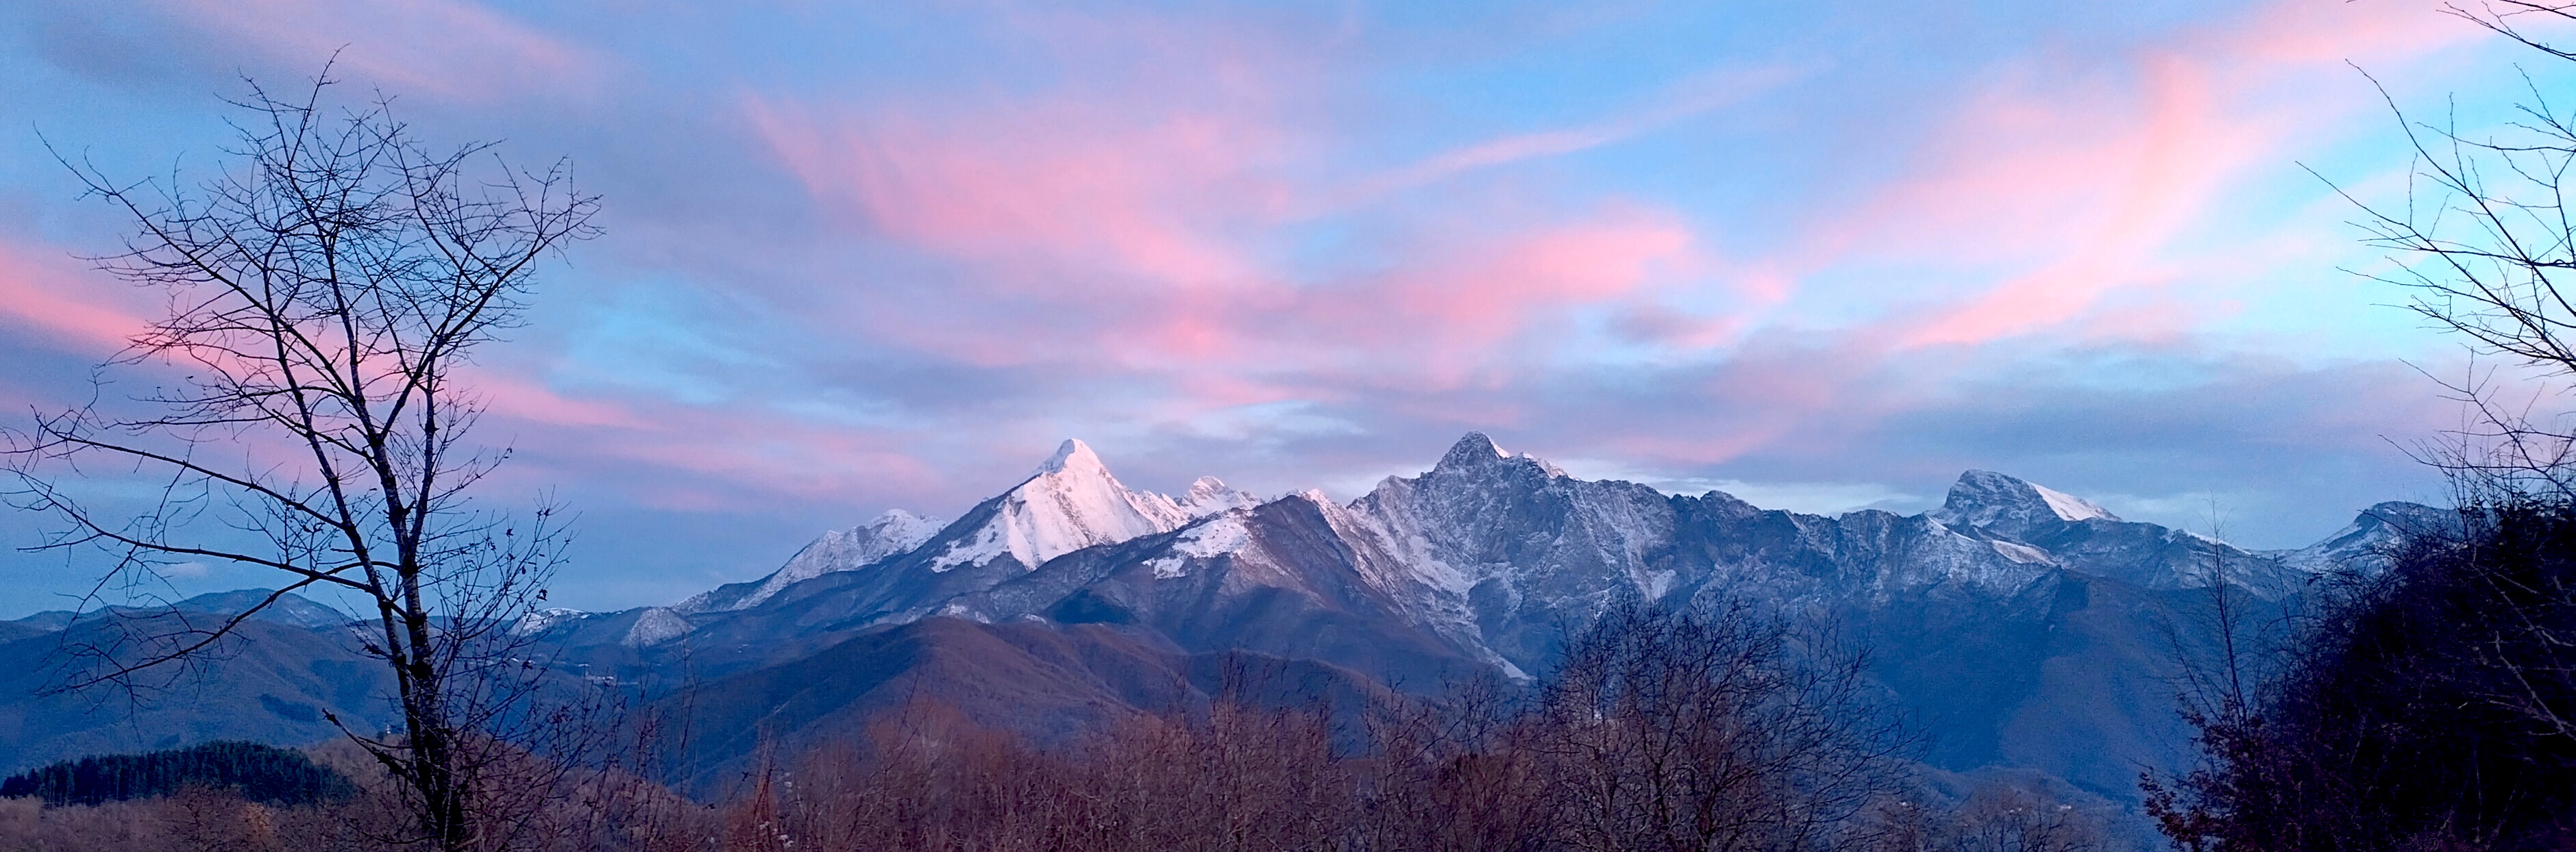 A wide-format photograph of the Apuan Alps viewed roughly 10 km from the NNW, showing a snowy mountain ridge on a background of blue sky with tufts of pink sunset clouds. The foreground is full of dark, leafless trees.